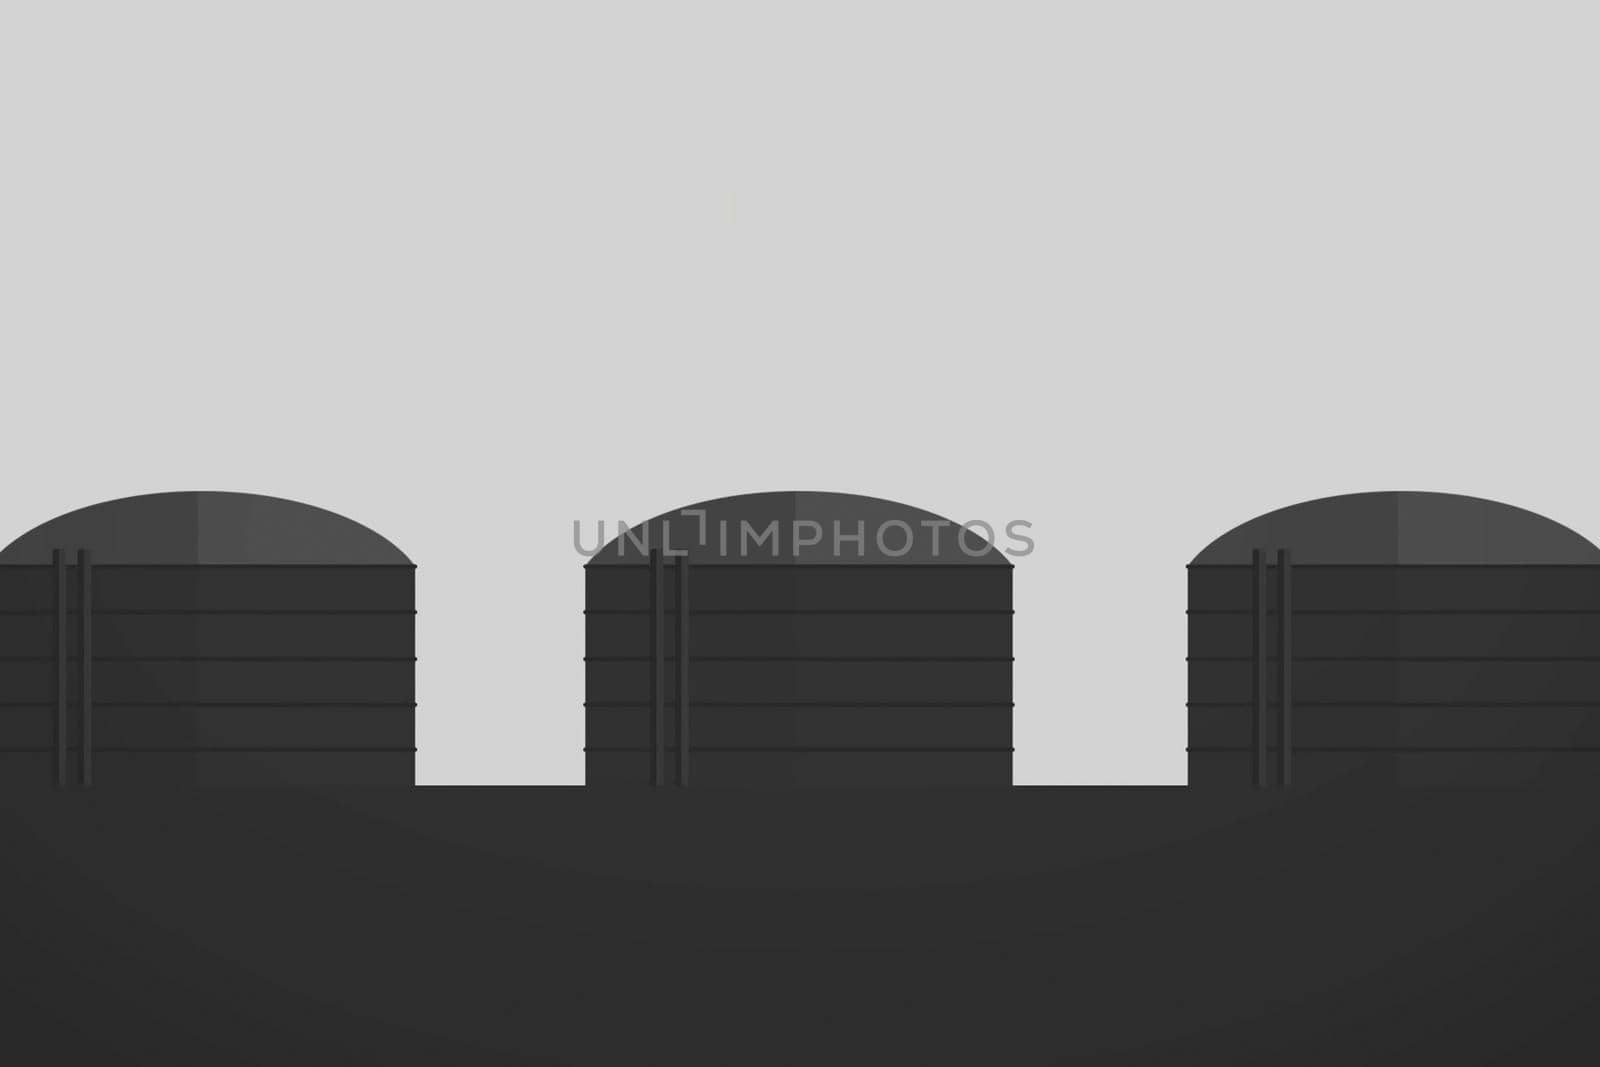 Fuel and gas storage tanks. Steel tanks, illustration by DePo